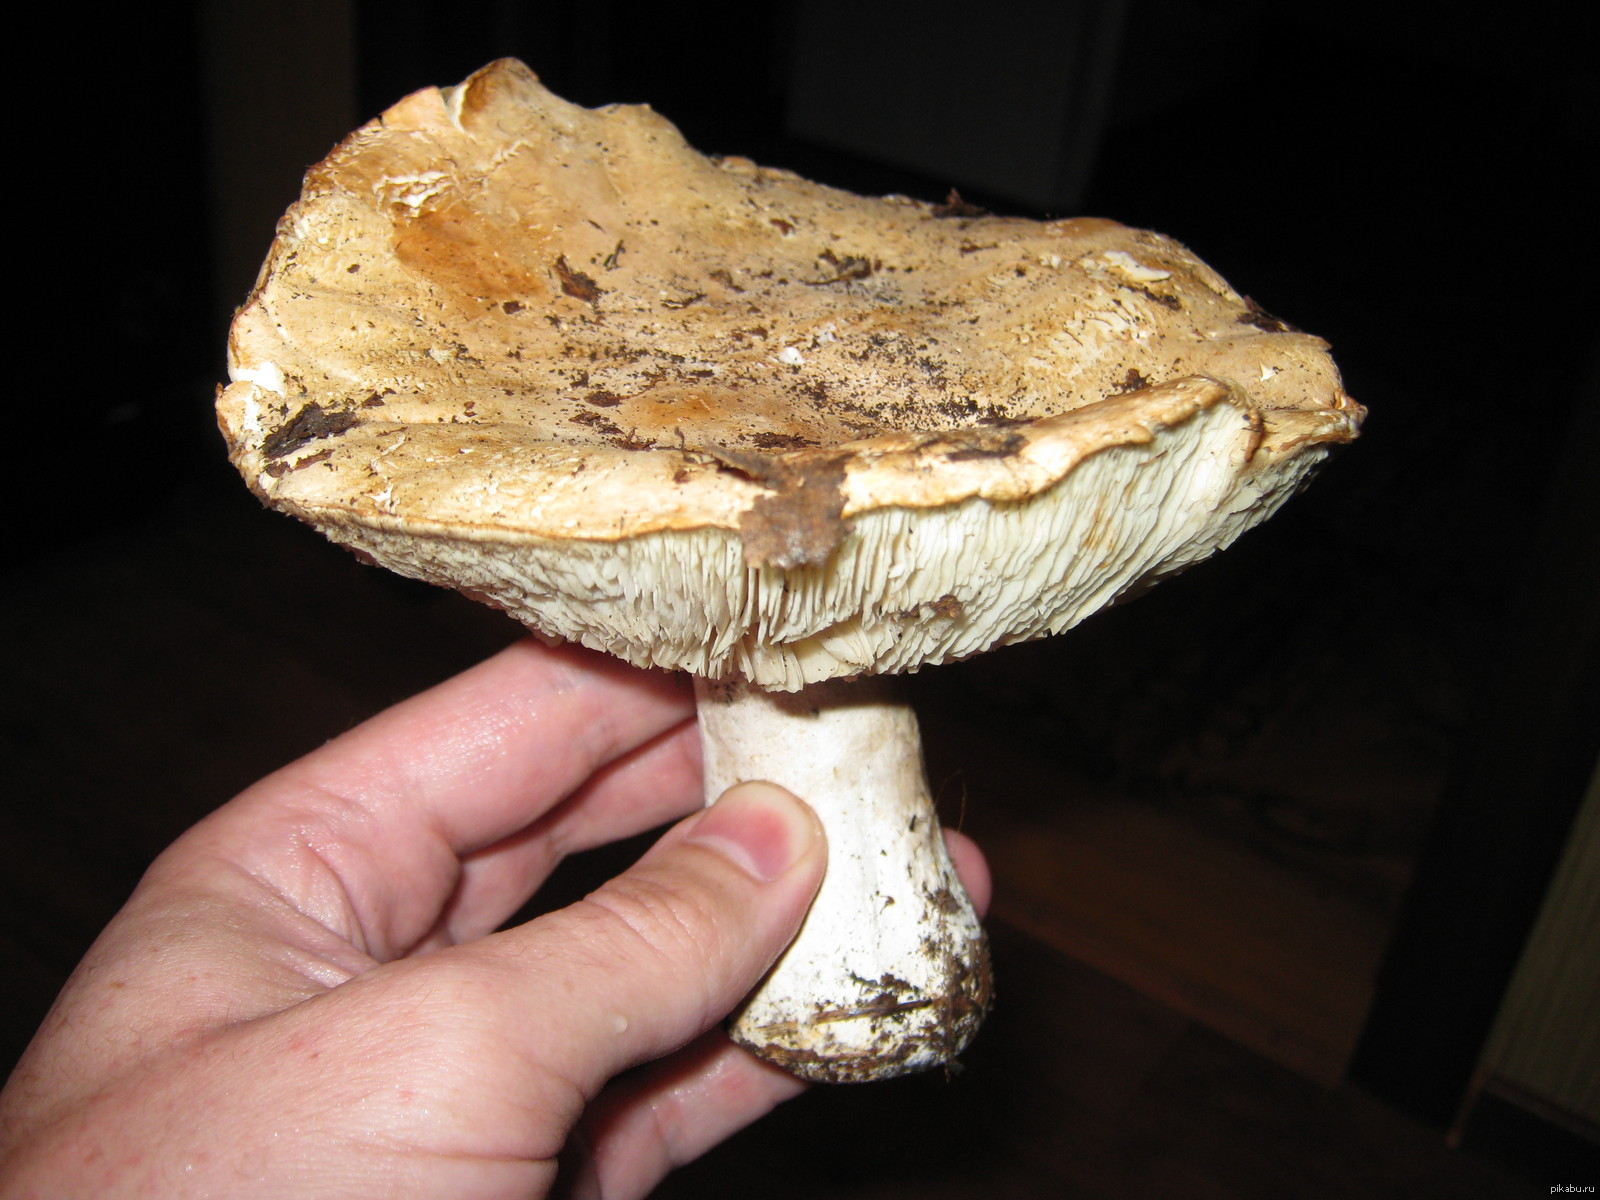 Edible or not? - Mushrooms, Esculent, Toadstool, Poisonous mushrooms, Question, Mushroom pickers